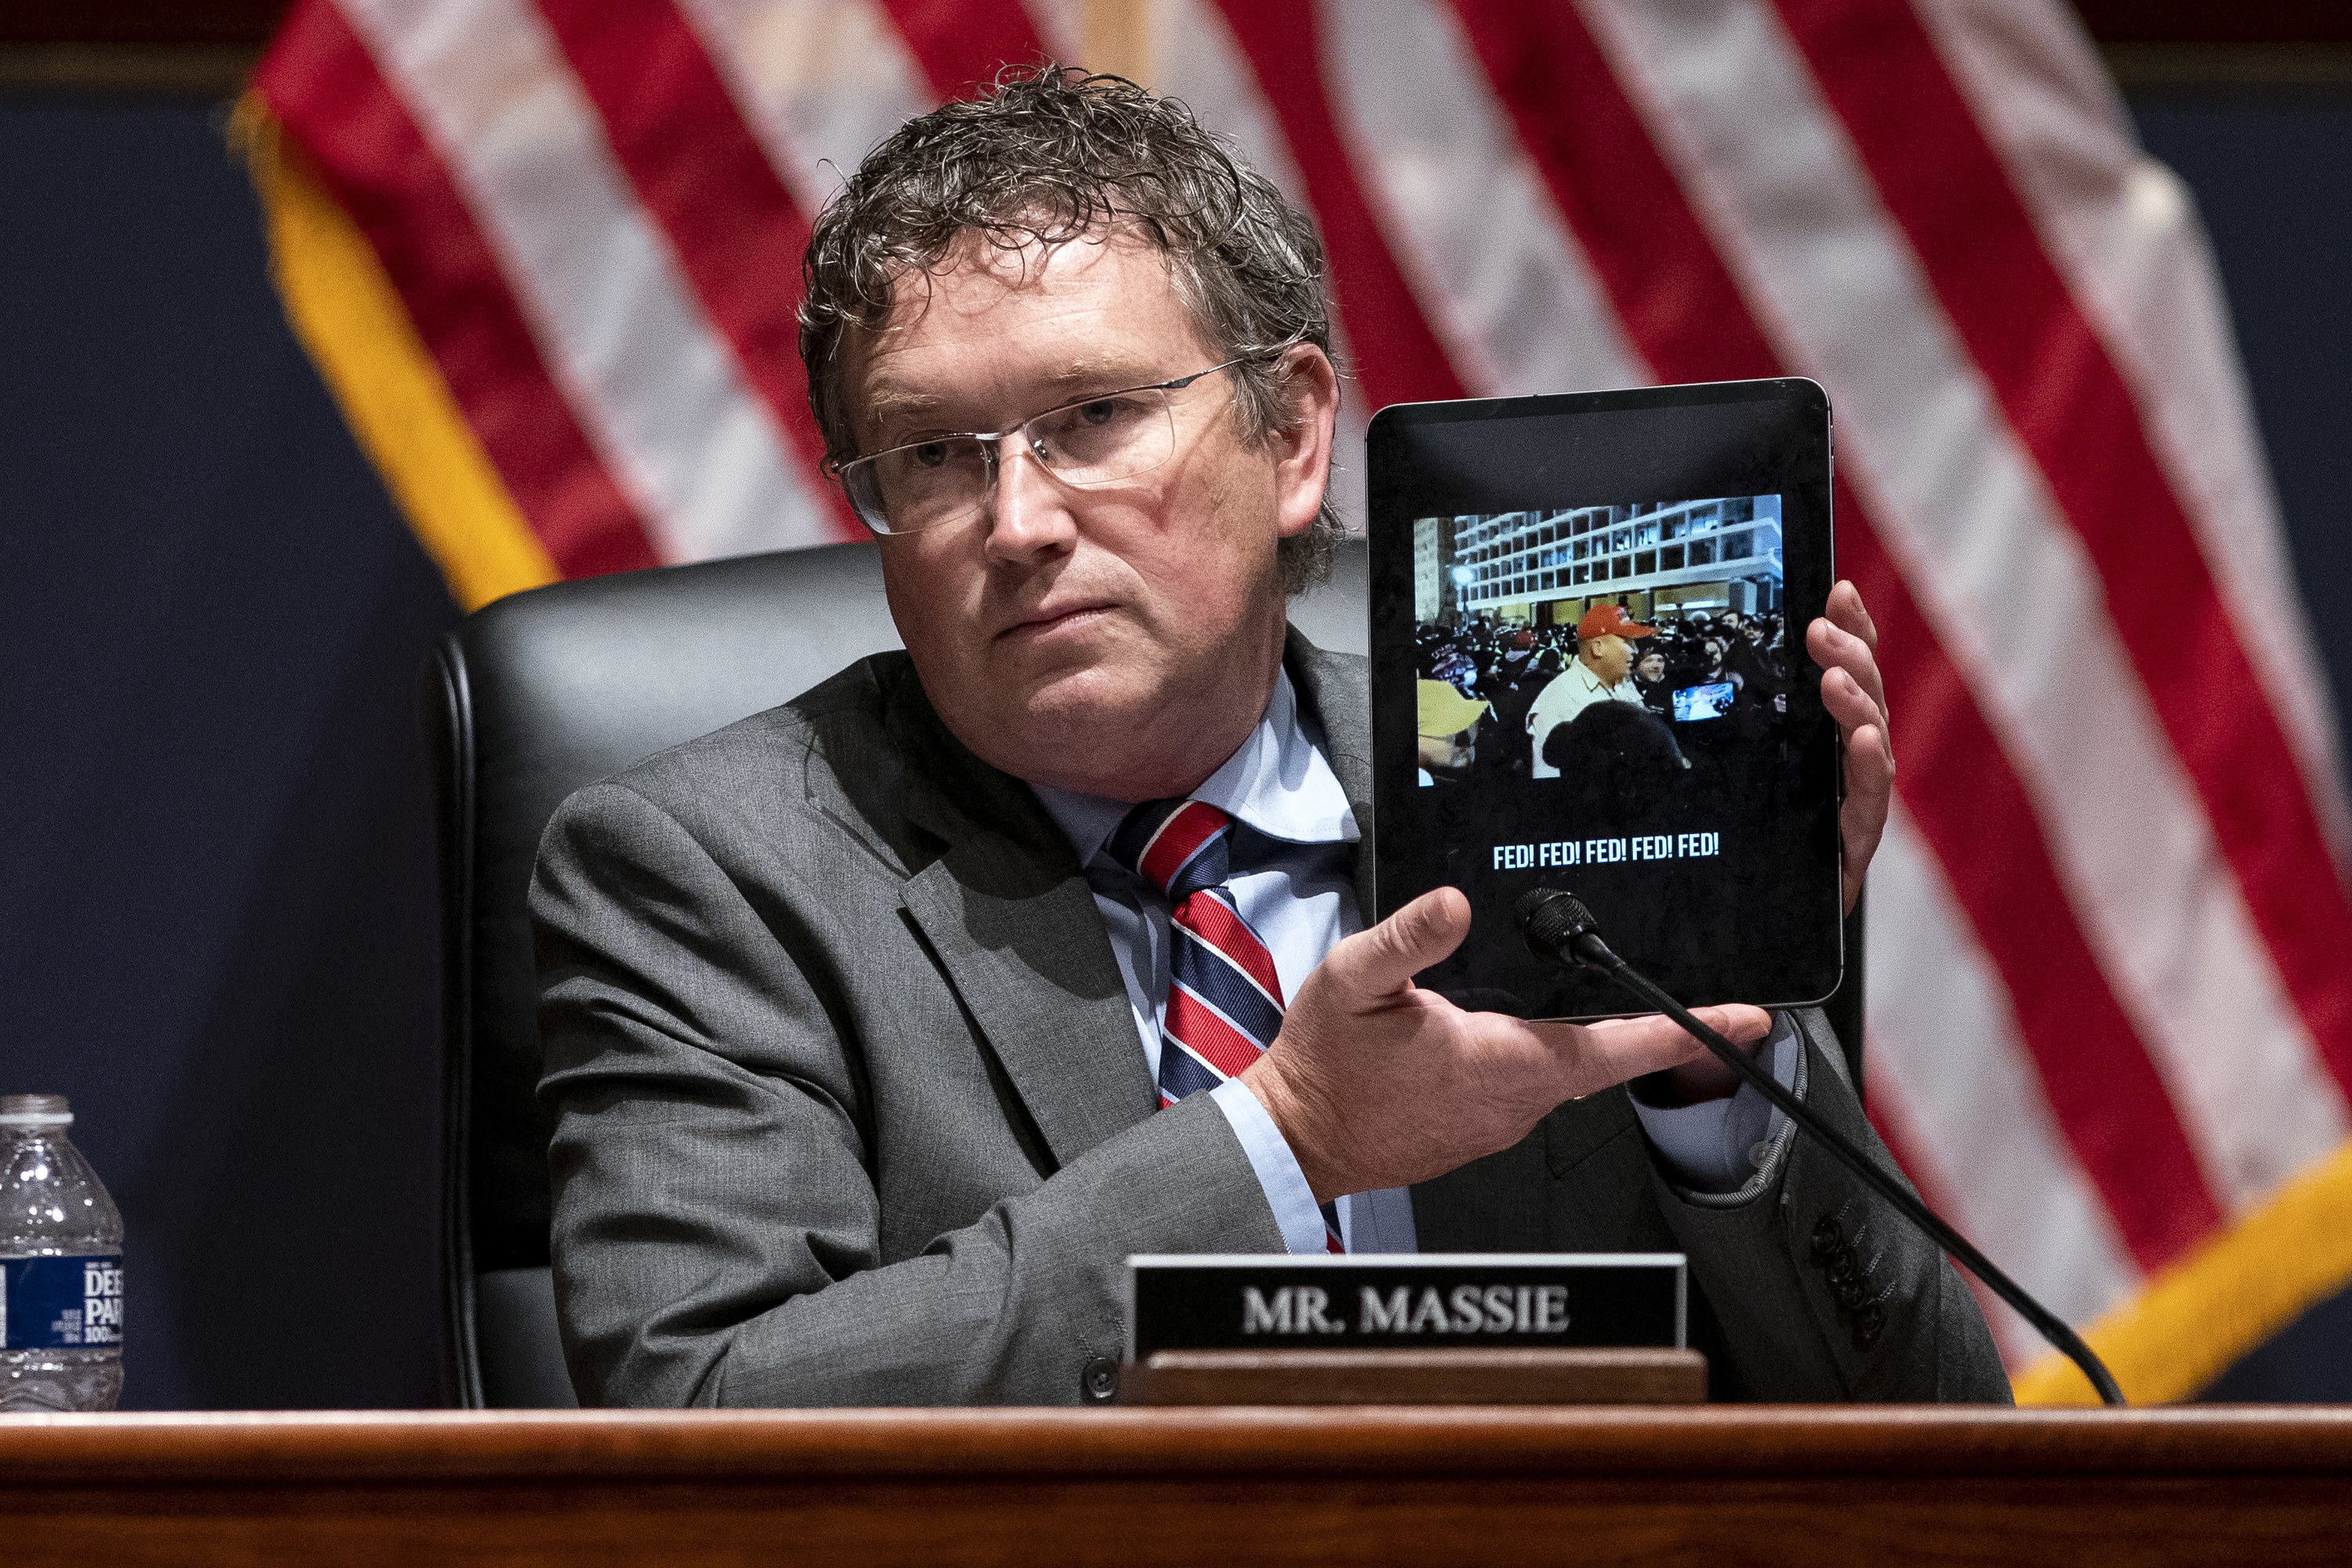 Massie at a hearing about the insurrection holding up a video from that day on his tablet